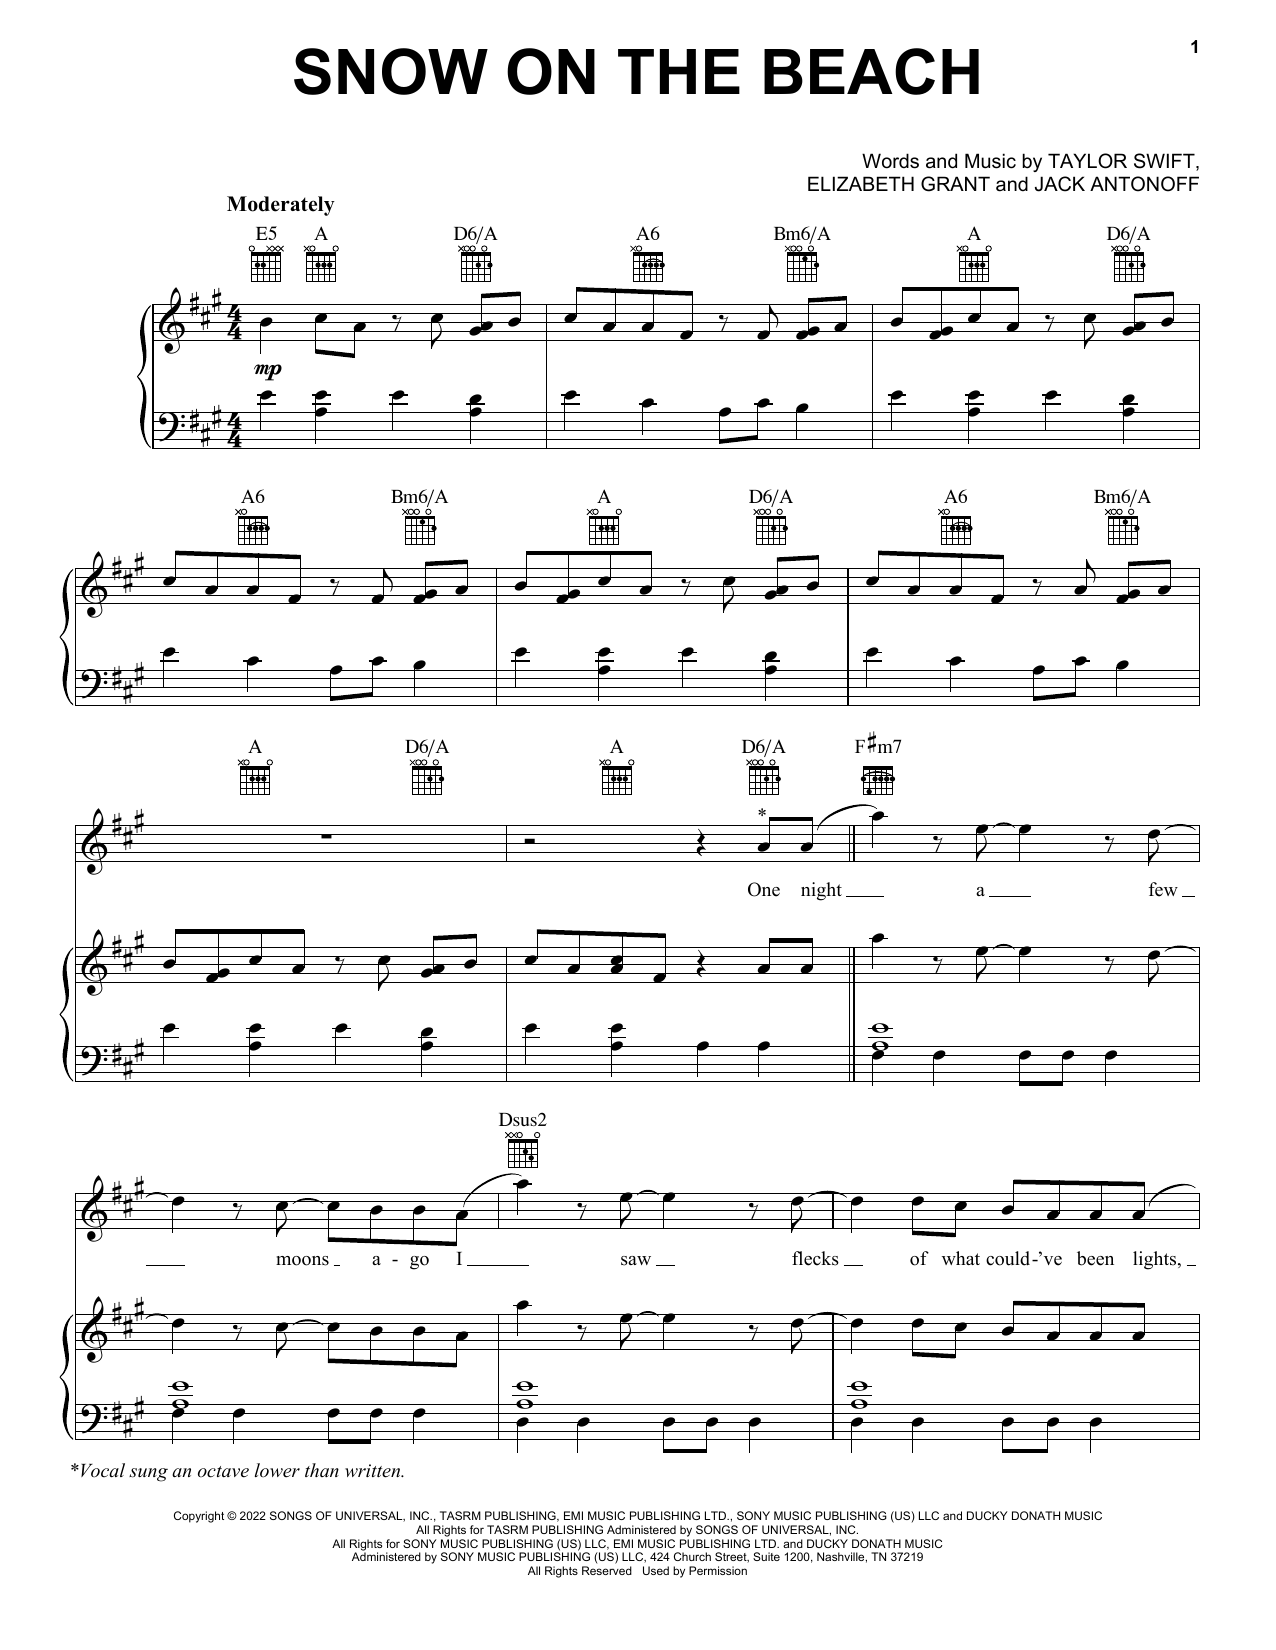 Taylor Swift "Snow On The Beach (feat. Lana Del Rey)" Sheet Music Notes